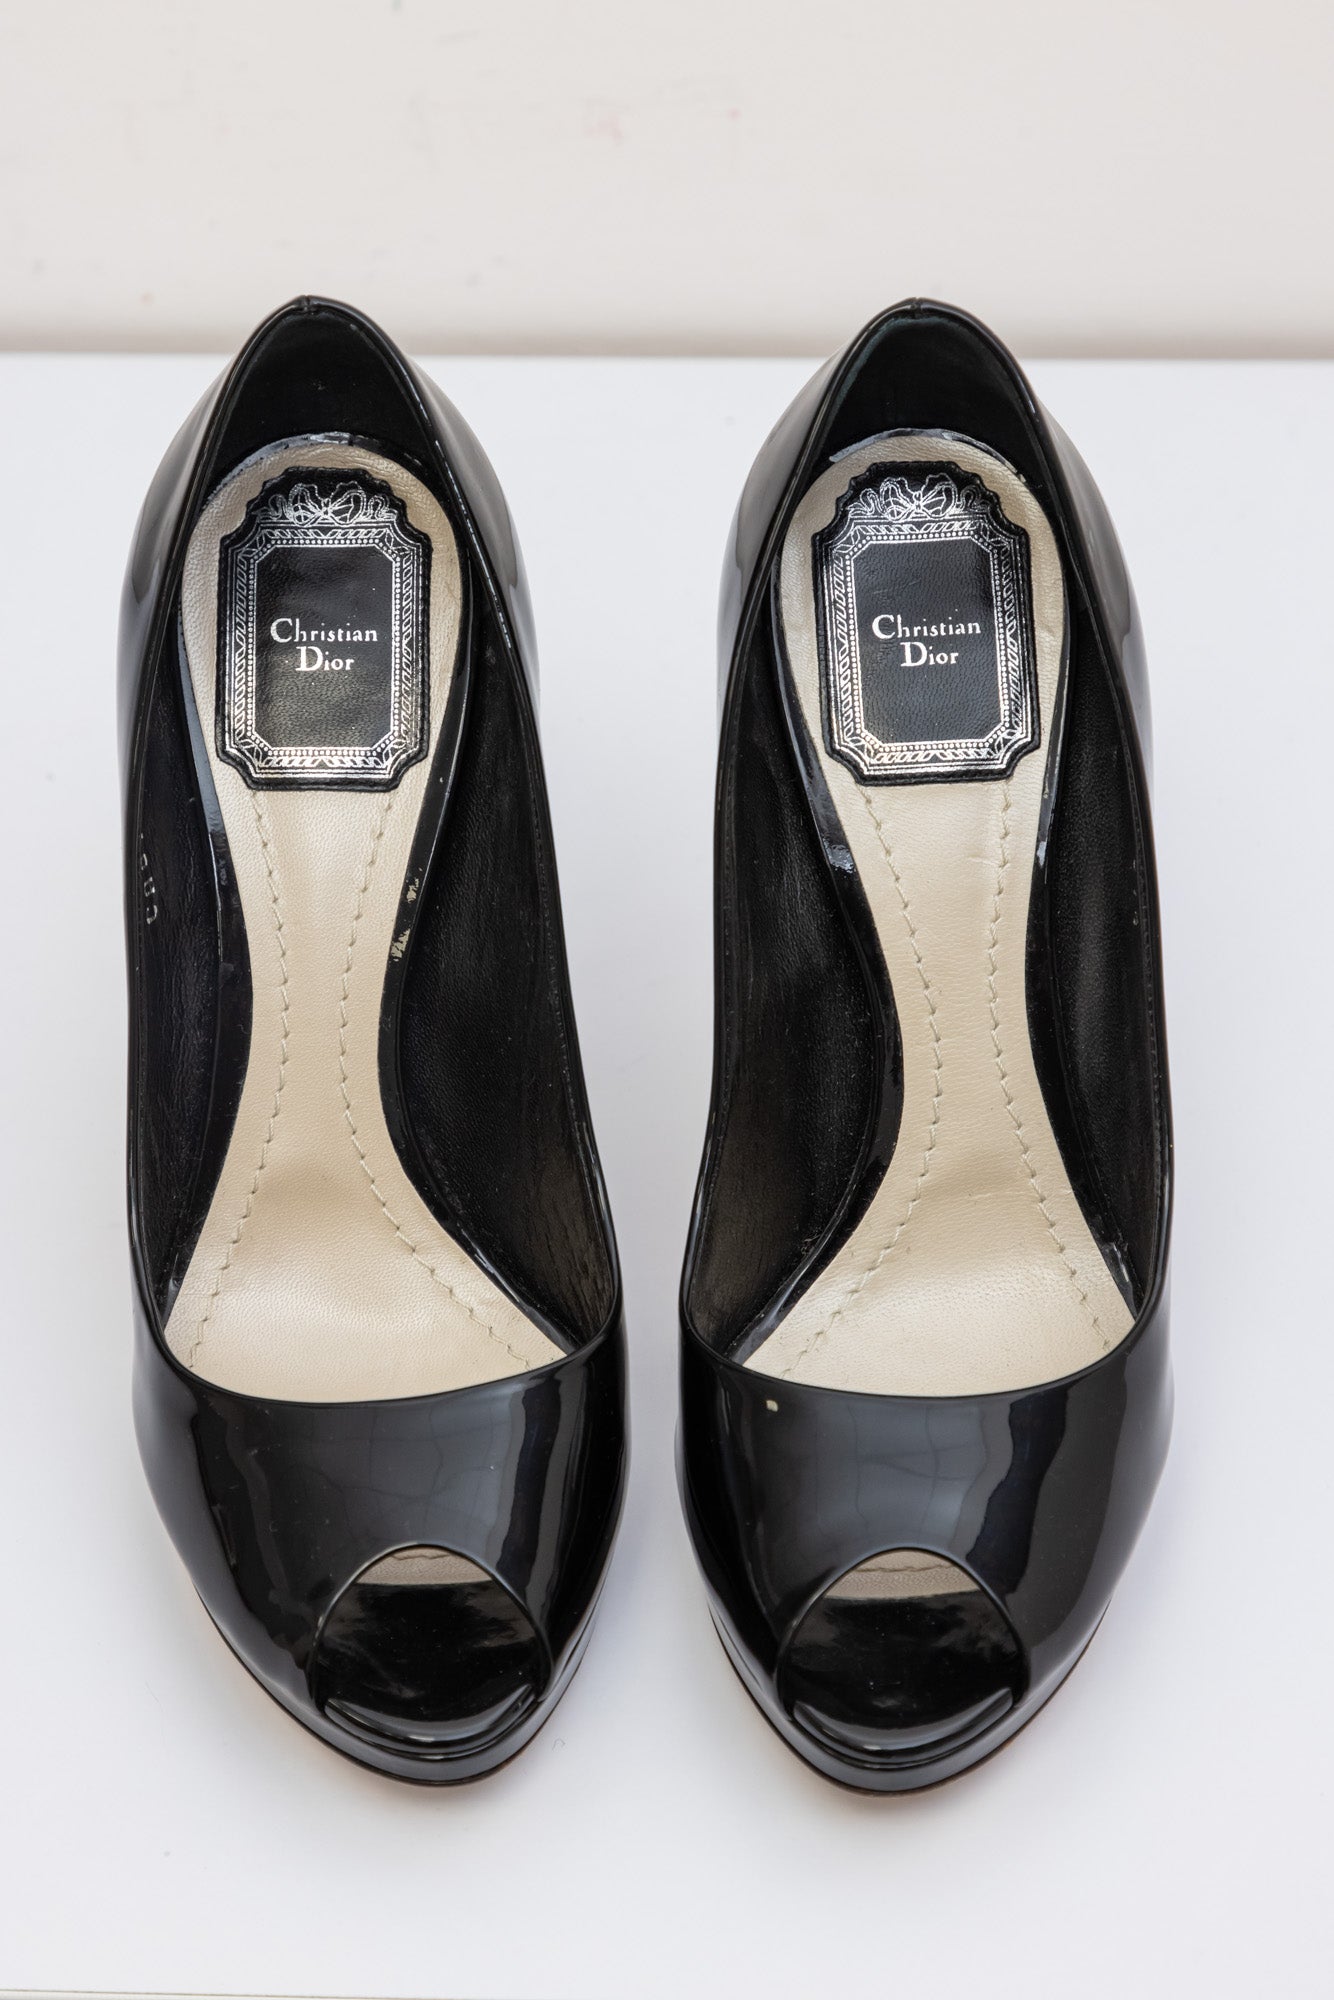 CHRISTIAN DIOR Black Leather Heels Shoes